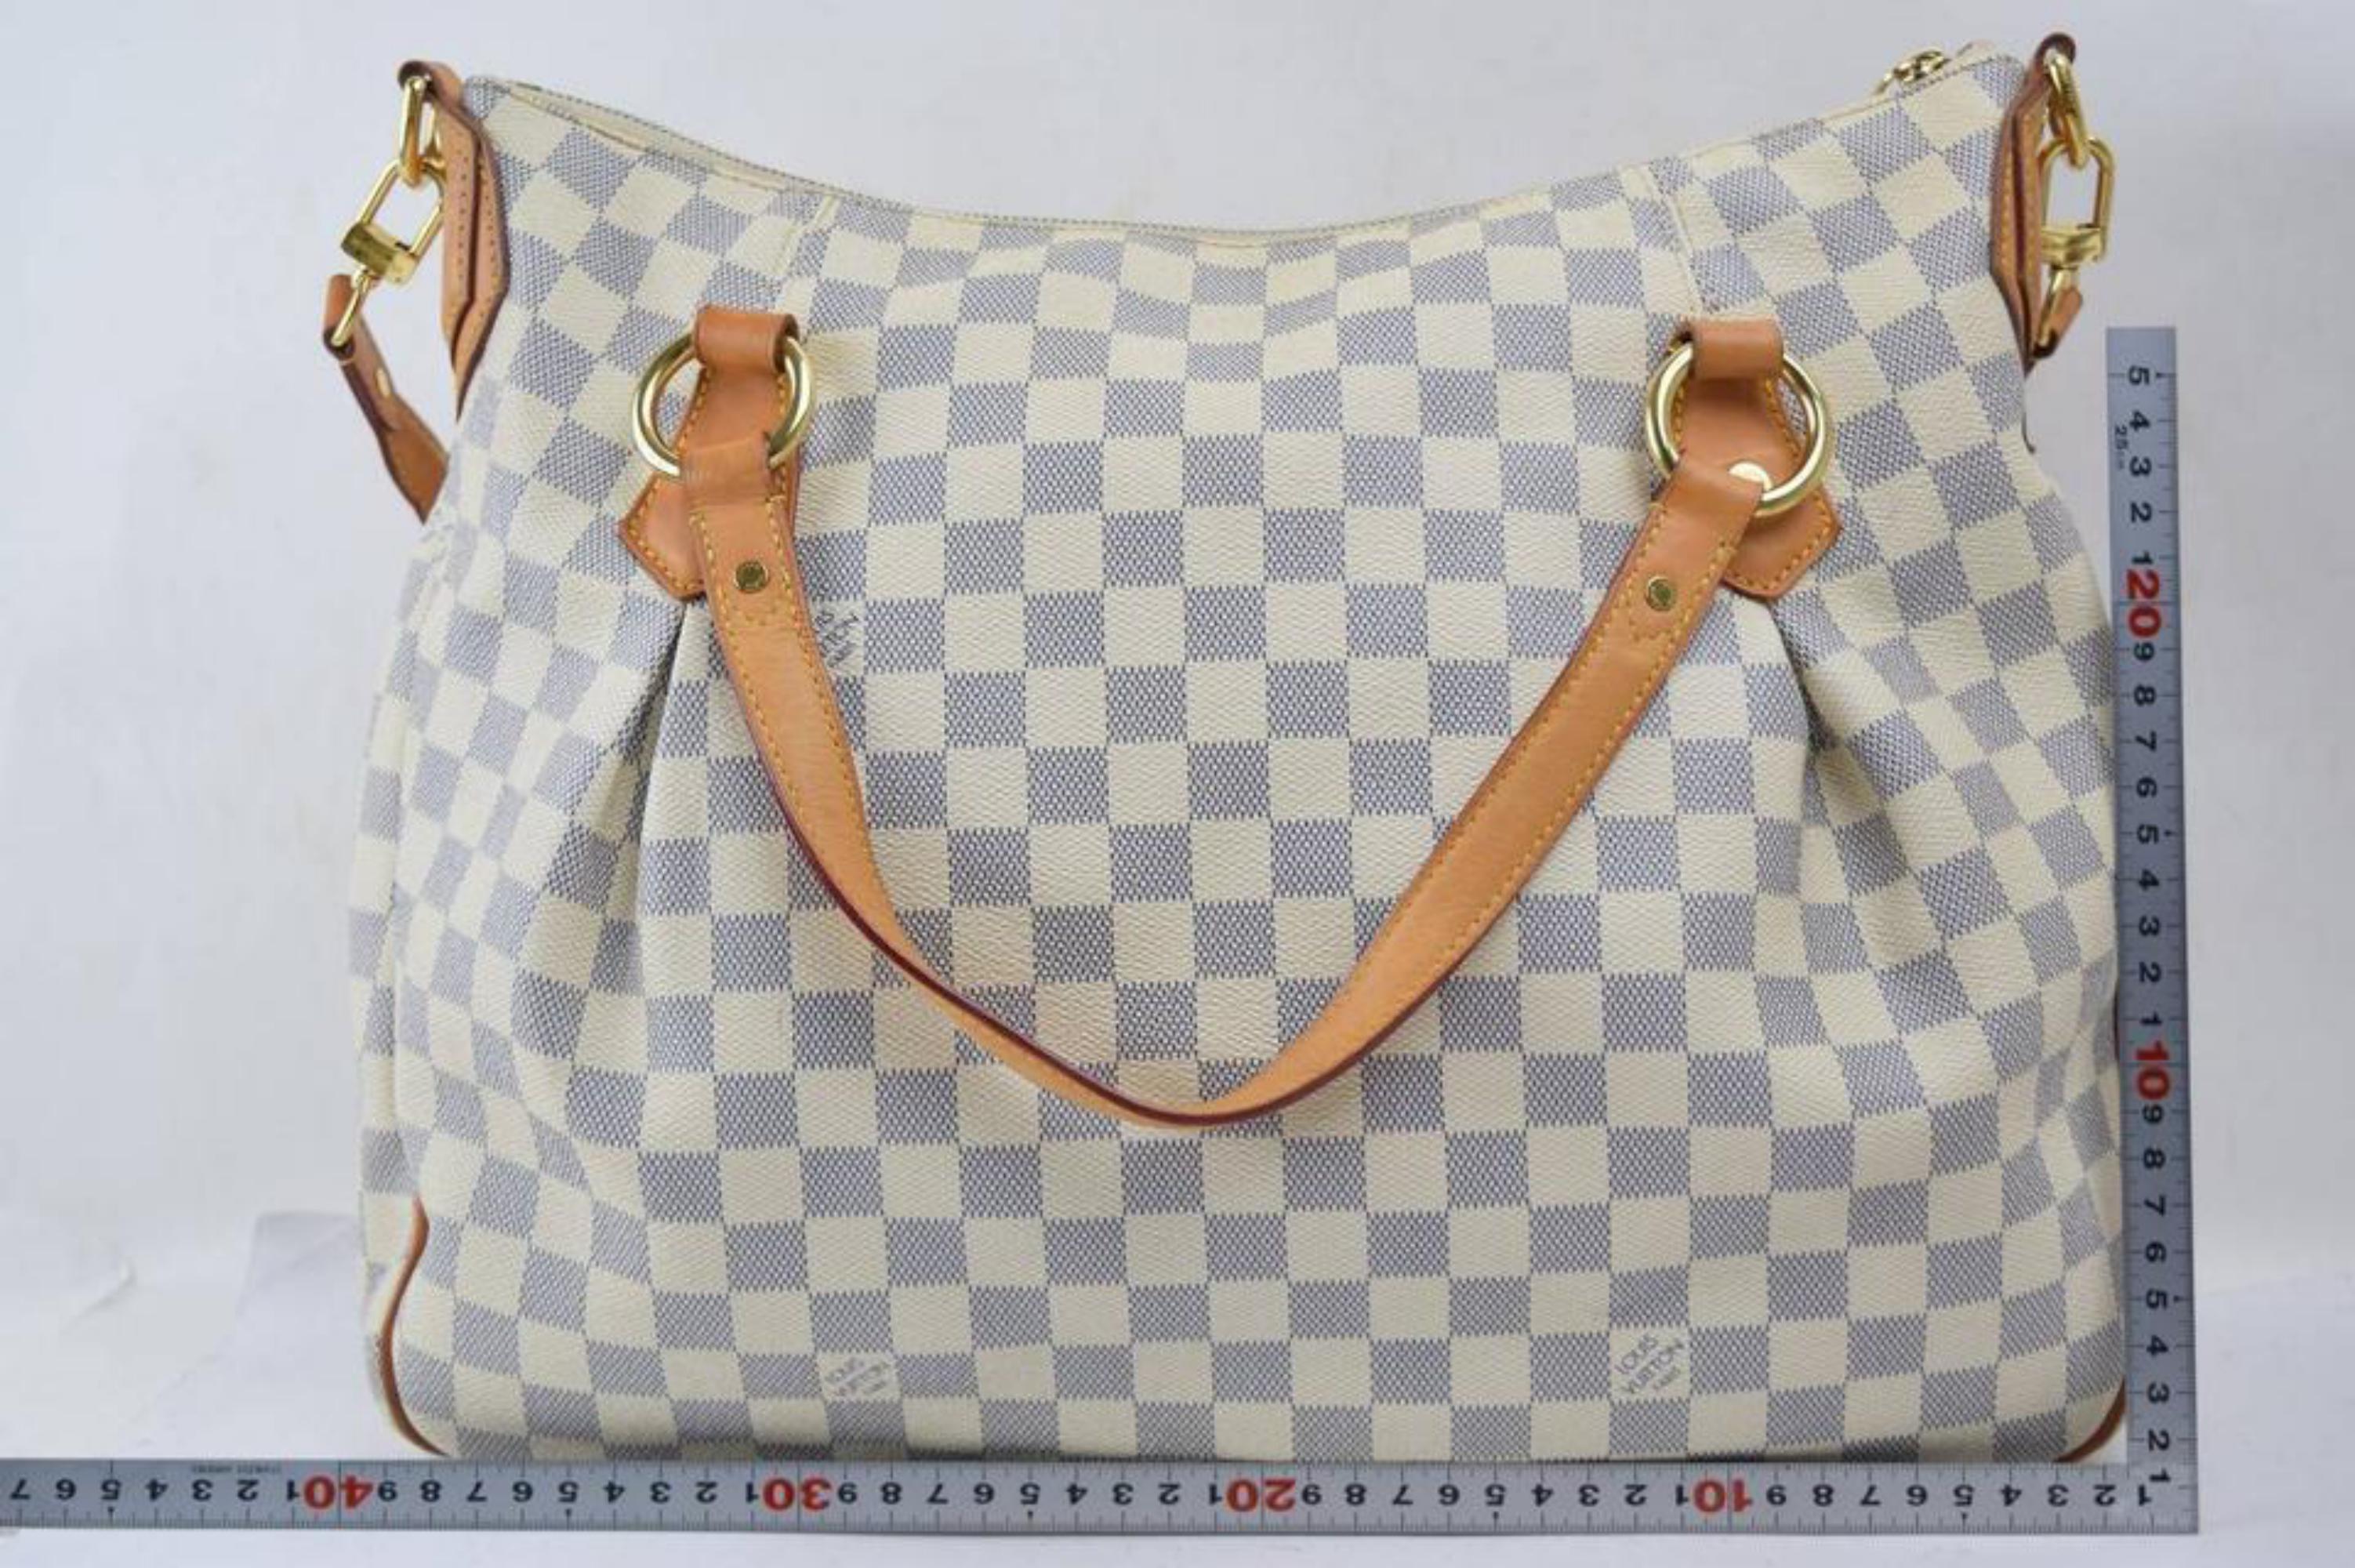 Louis Vuitton Evora Damier Azur Mm 867371 White Coated Canvas Shoulder Bag In Good Condition For Sale In Forest Hills, NY